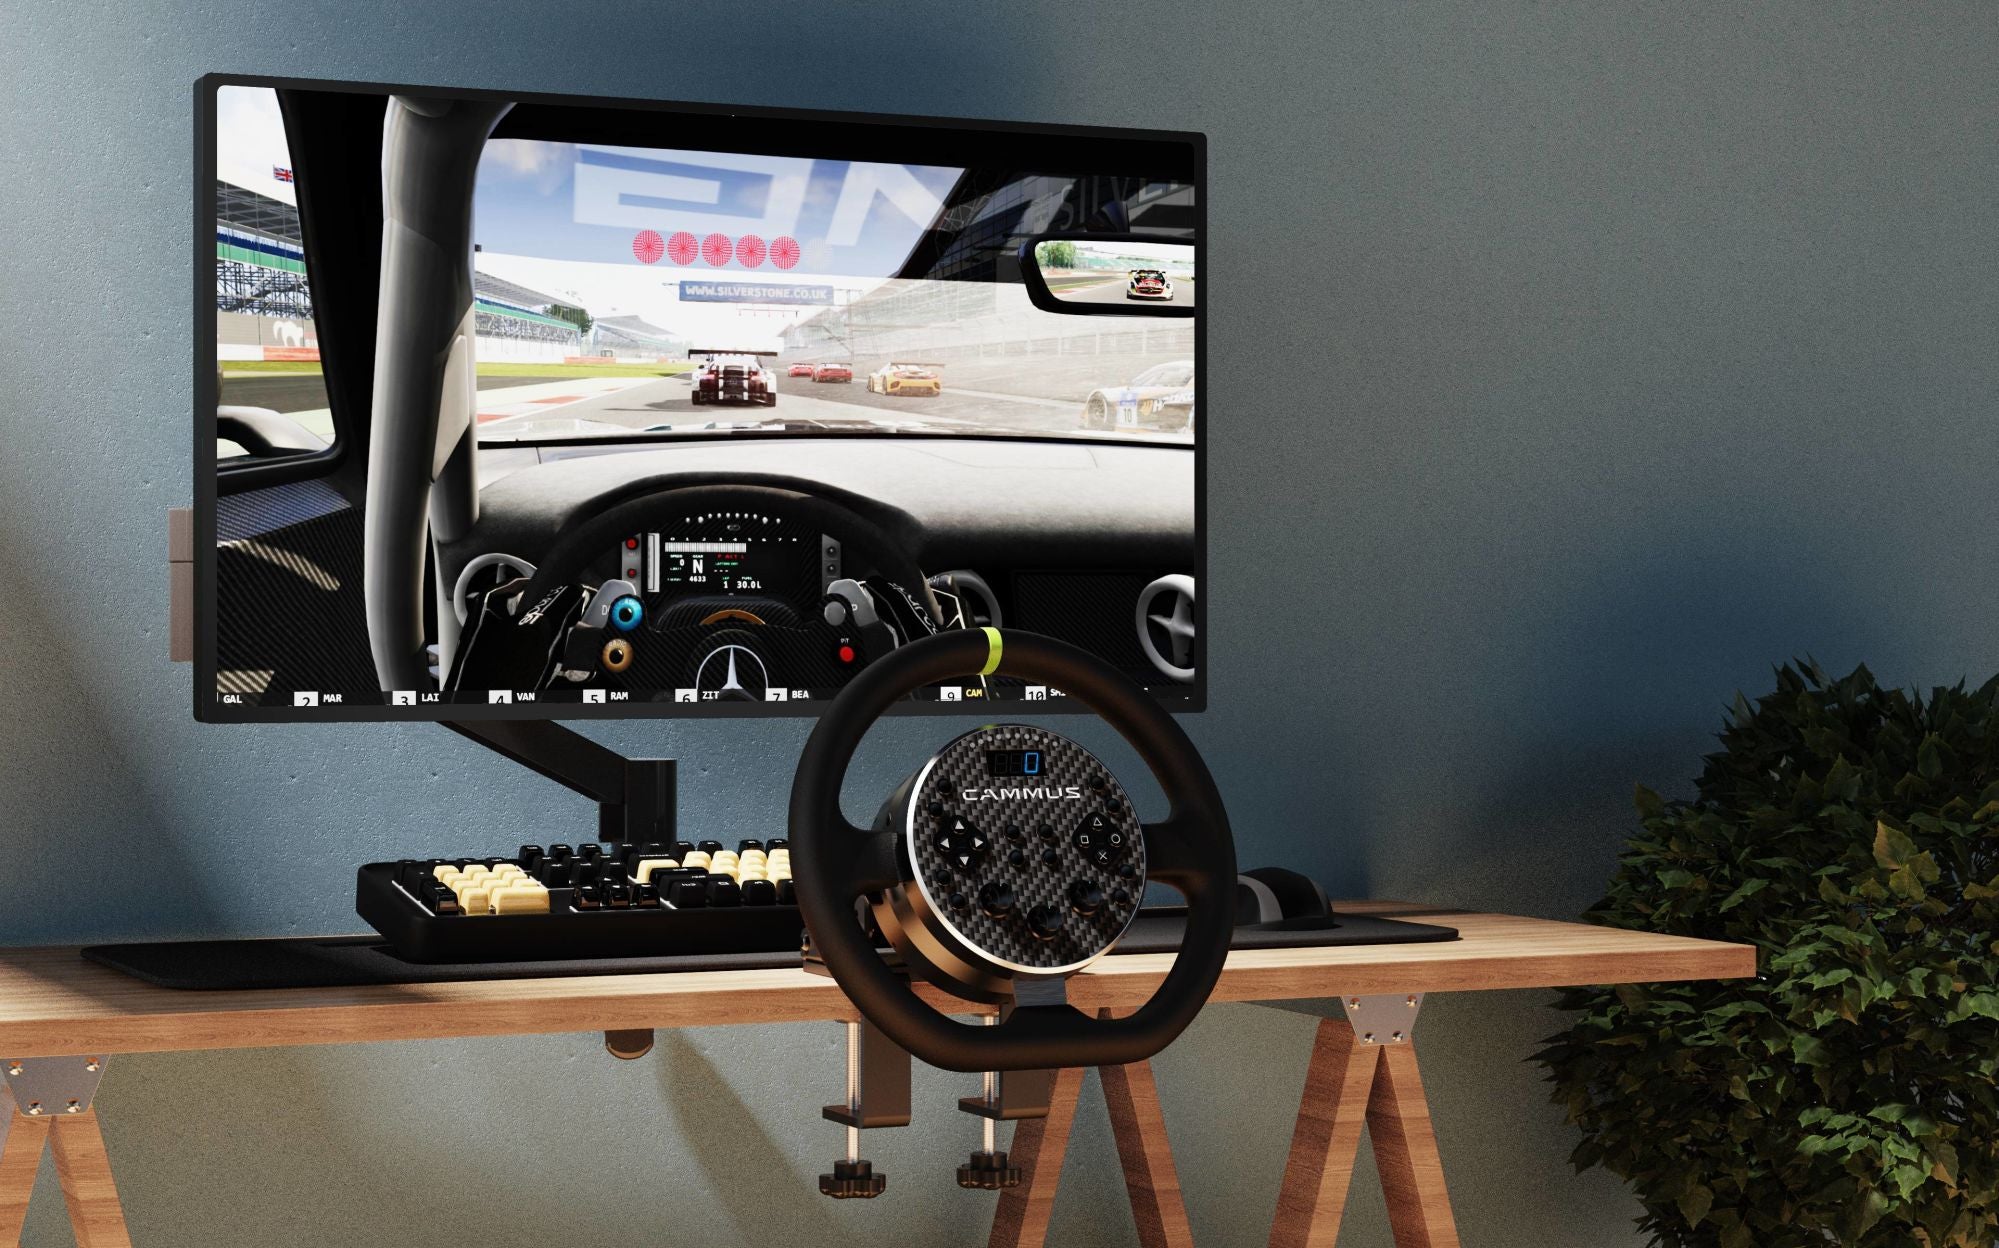 A CAMMUS C5 Direct Drive Base Racing Wheel For PC Games, featuring the word CAMMUS prominently displayed on its steering wheel.